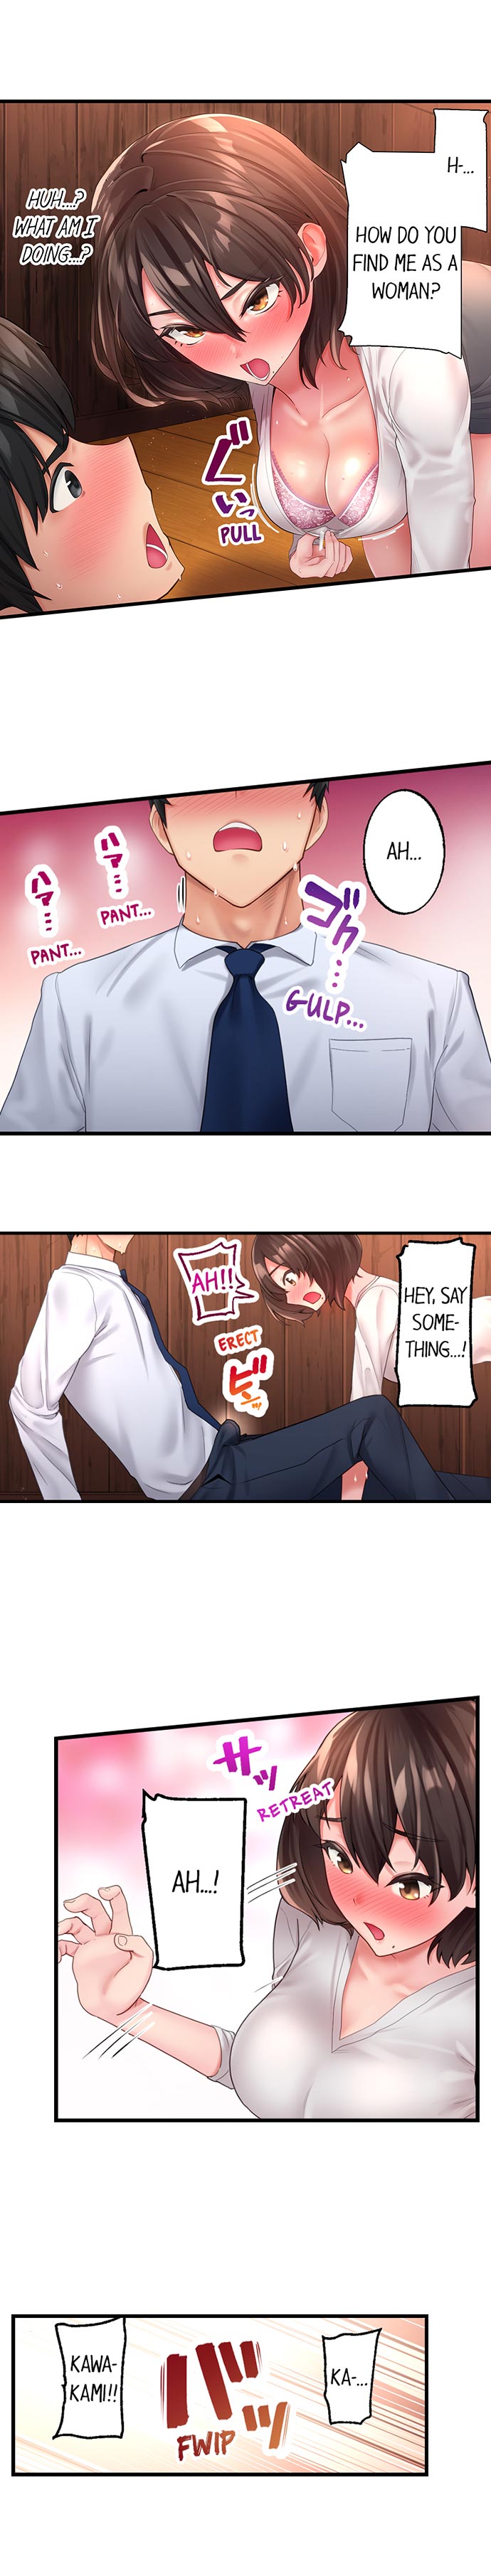 #Busted by My Co-Worker Chapter 2 - Page 7